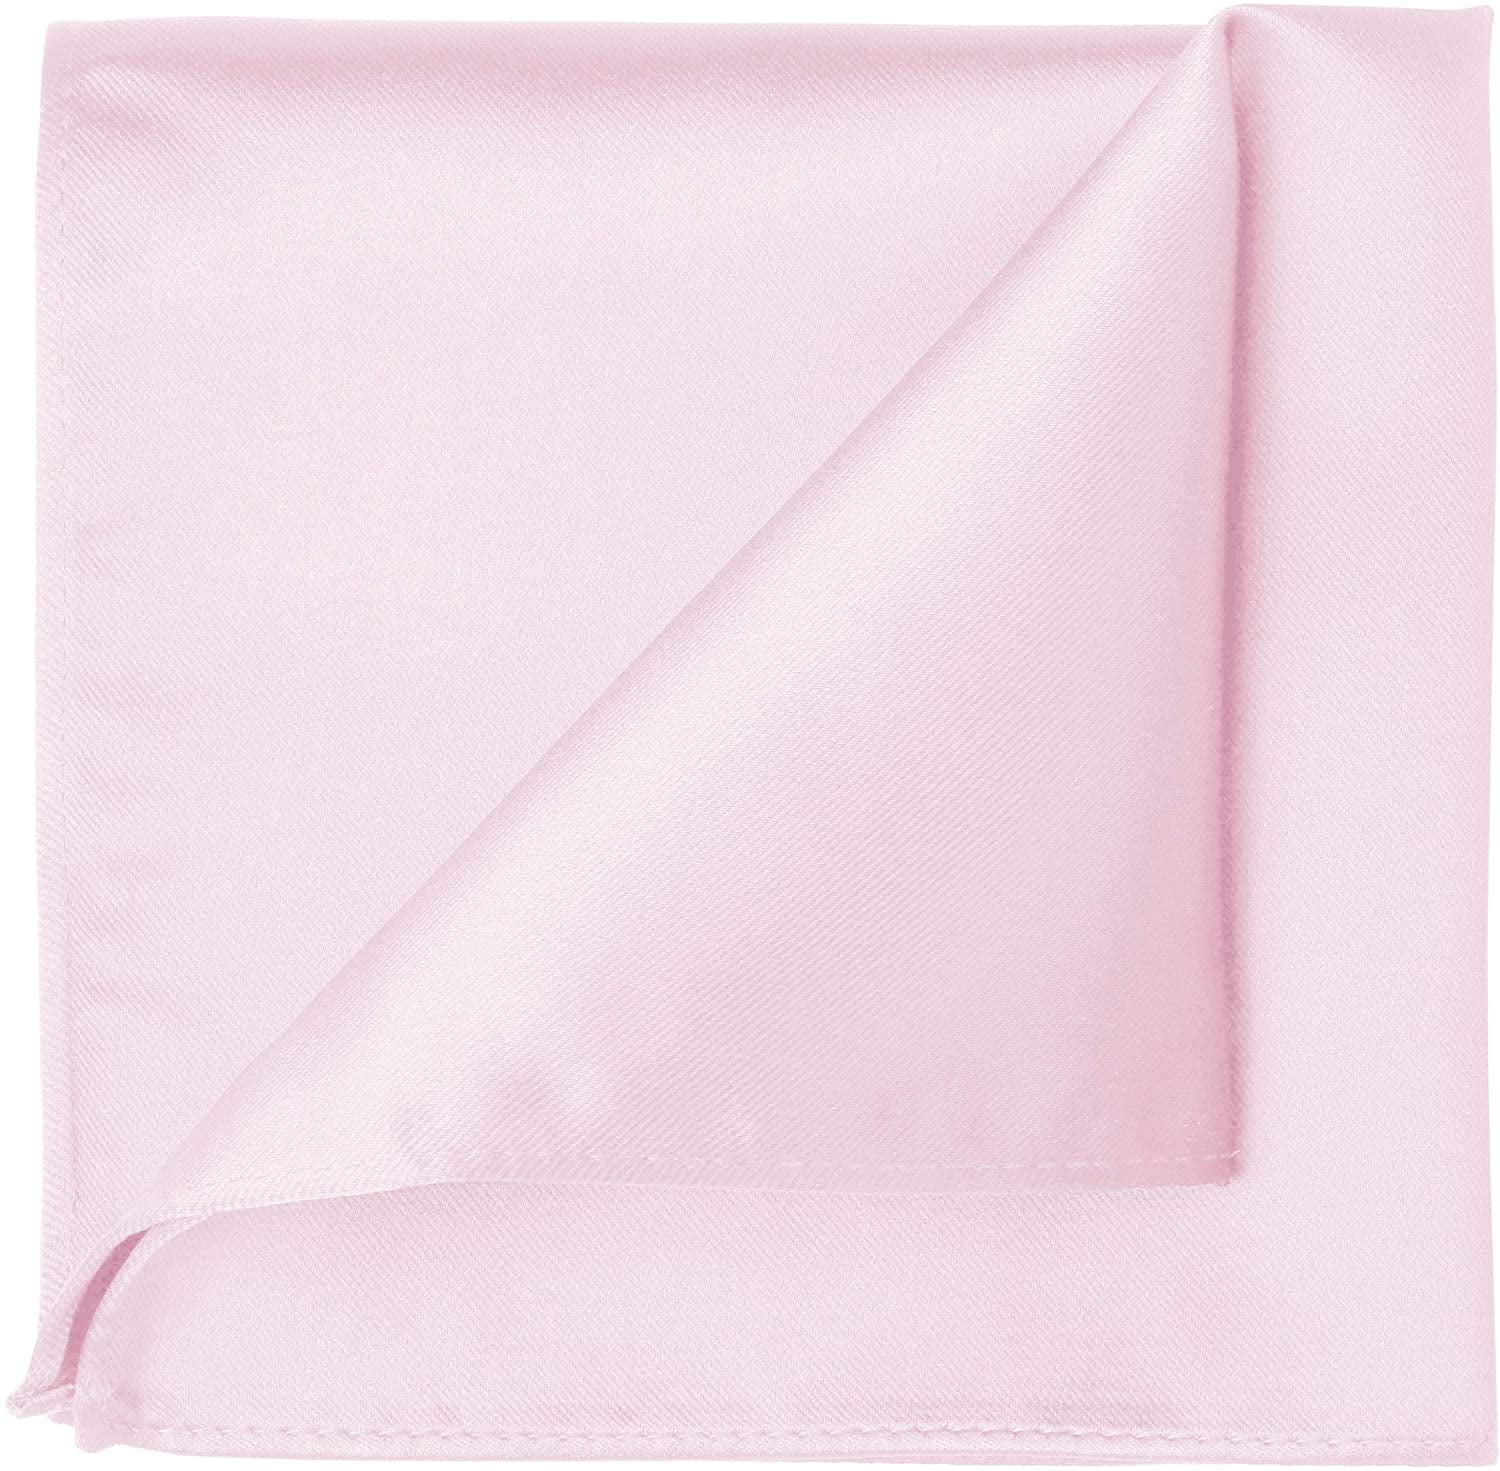 Handkerchief Square for Weddings All Colours Smart Fashionable Satin Hanky 